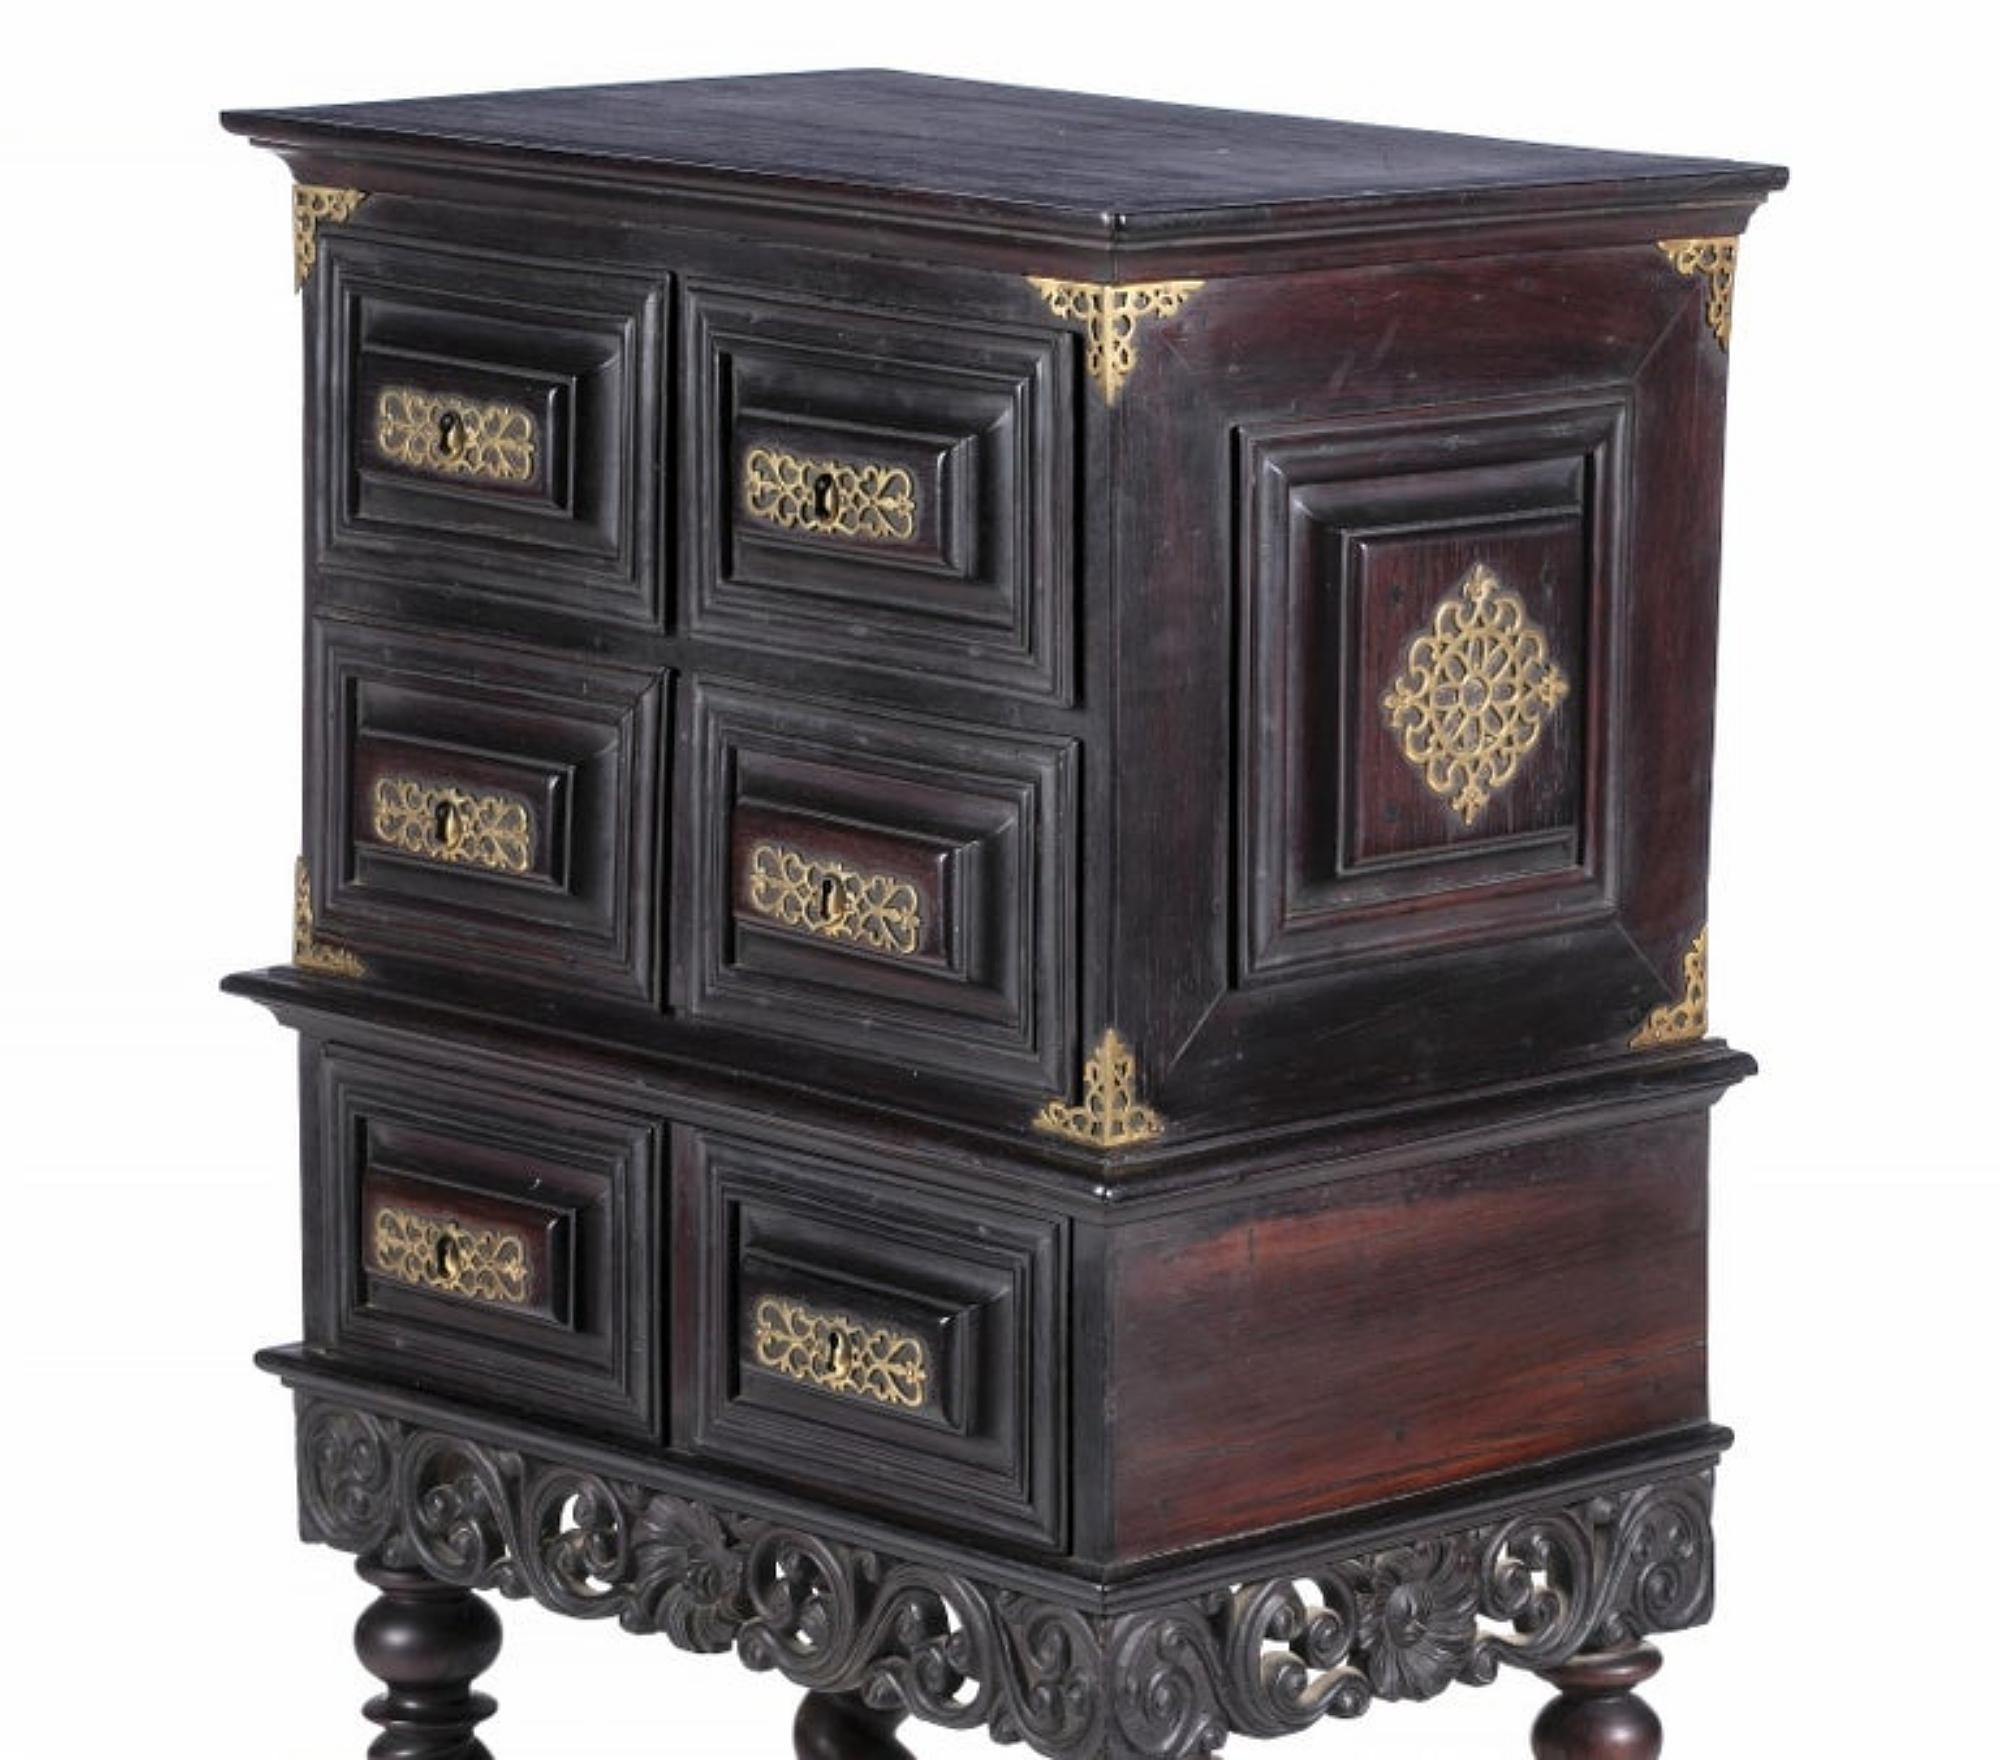 Portuguese 18th century cabinet
Made of kingwood.
Three drawers simulating four.
Base with profusely decorated skirts with plant motifs, turned legs and beams. Hardware and fittings in yellow metal.
Small defects.
Dimensions: 102 x 54 x 37 cm.